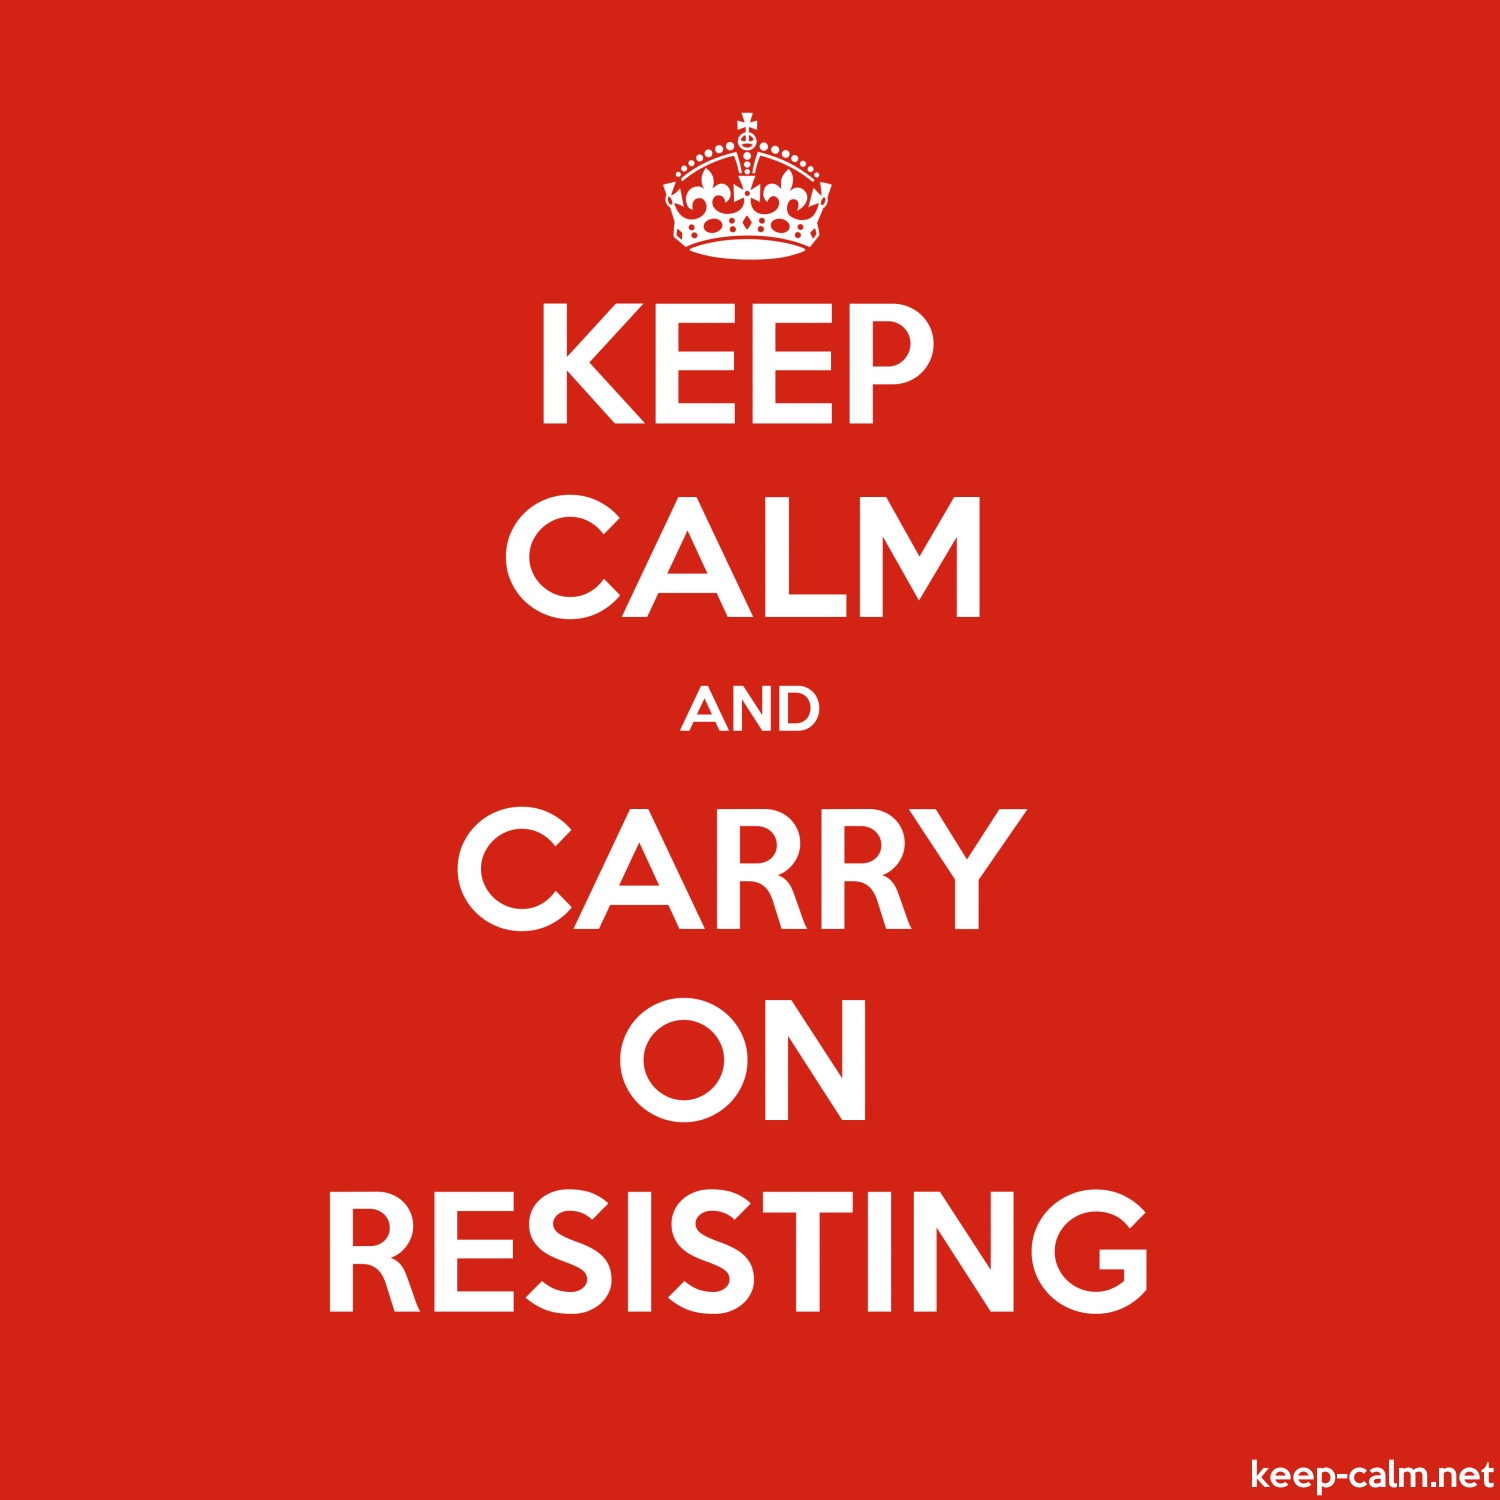 keep-calm-and-carry-on-resisting-1500-1500.jpg